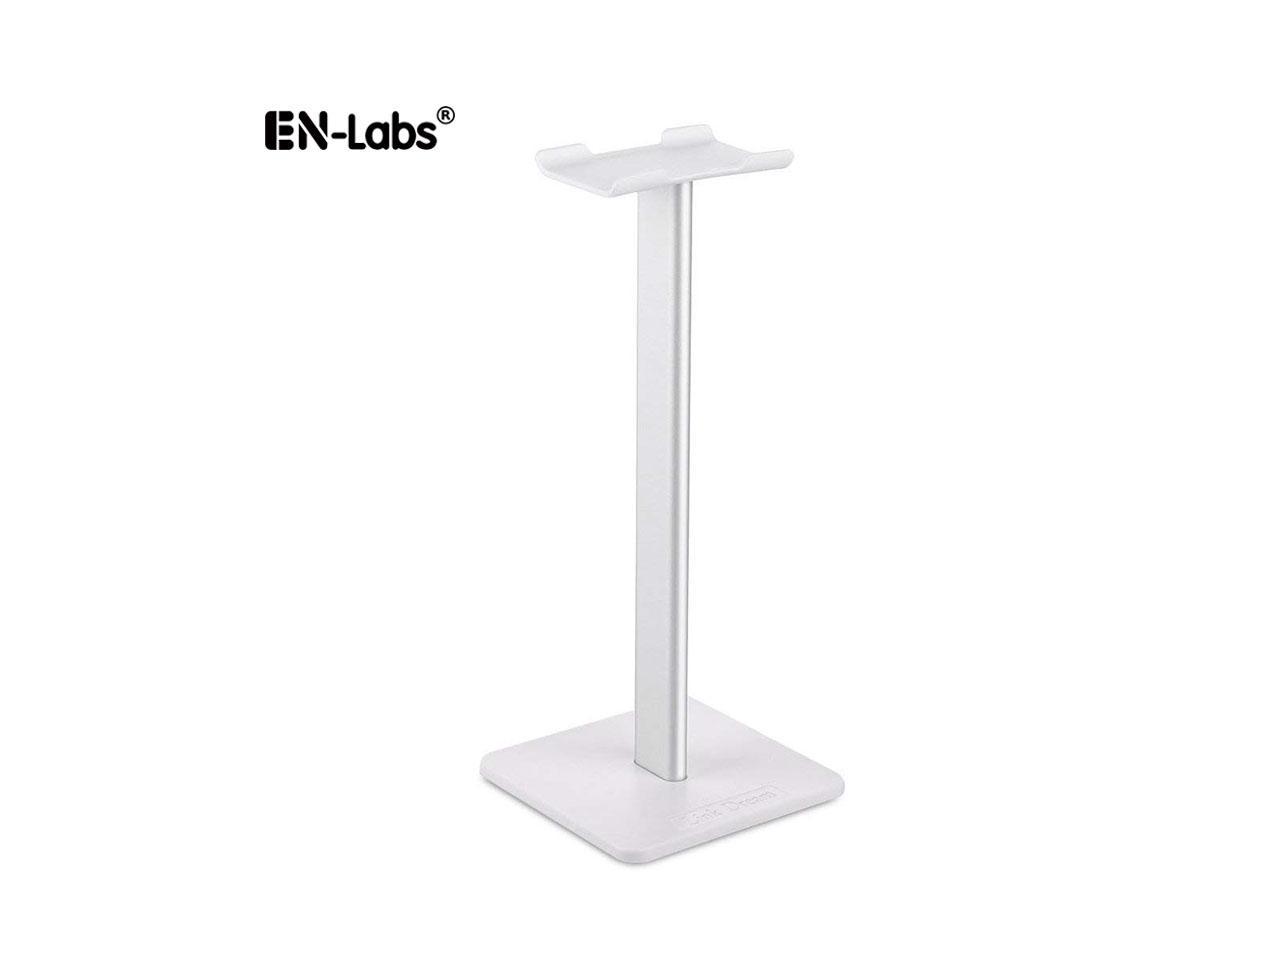 EnLabs Headphone Stand/Holder,Universal Aluminum Gaming Earphone Mount,Headset Showing Display Stand Hanger for All Headphone Size –White